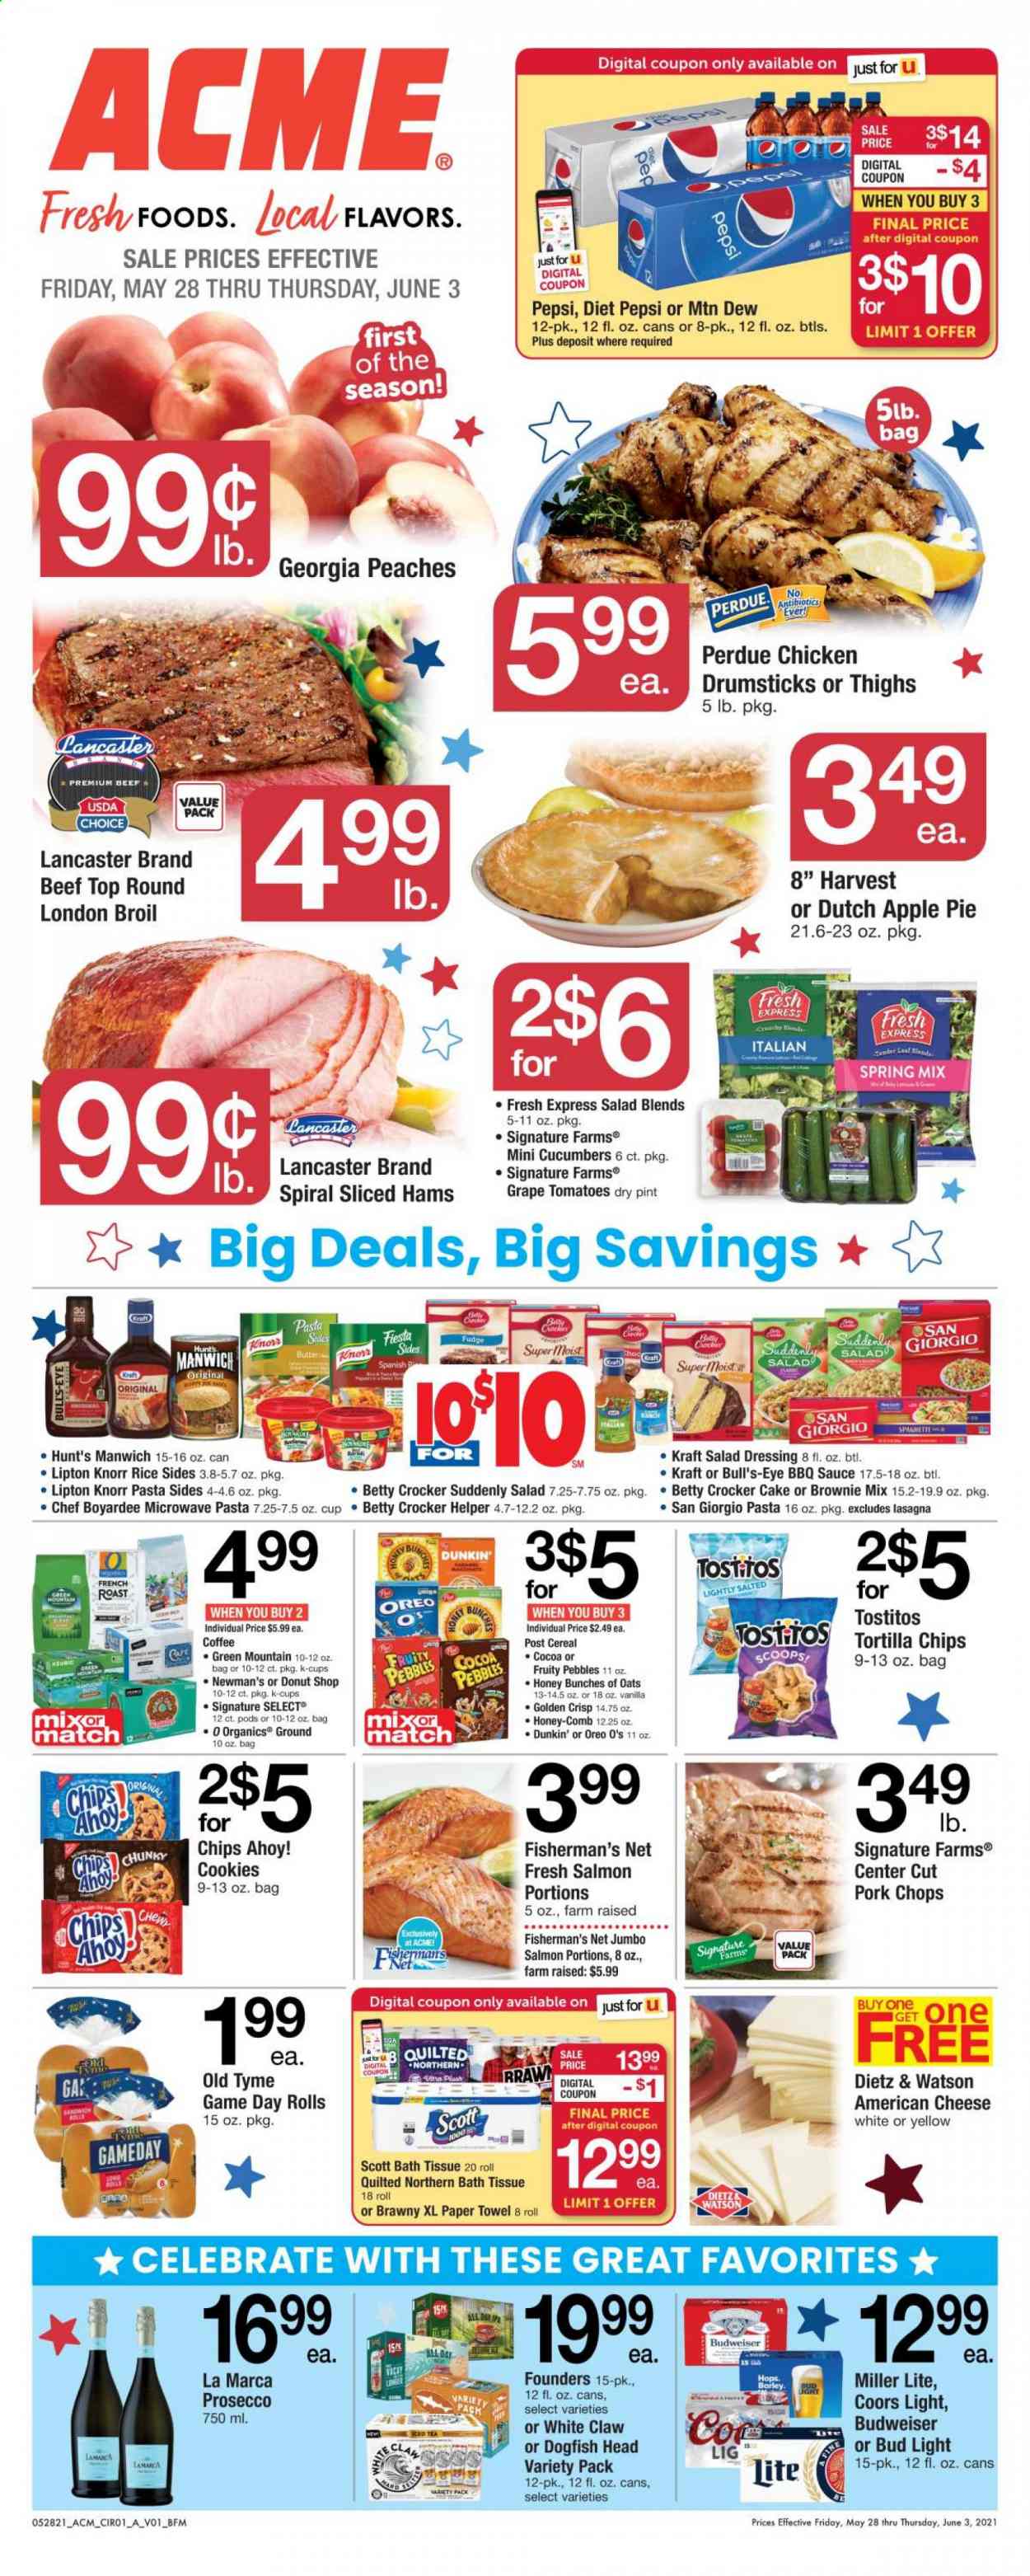 thumbnail - ACME Flyer - 05/28/2021 - 06/03/2021 - Sales products - Scott, cake, pie, apple pie, brownie mix, cucumber, tomatoes, clams, salmon, spaghetti, Knorr, sauce, Perdue®, pasta sides, Kraft®, Dietz & Watson, american cheese, Oreo, butter, cookies, fudge, Chips Ahoy!, tortilla chips, chips, Tostitos, Manwich, Chef Boyardee, cereals, Fruity Pebbles, rice, BBQ sauce, salad dressing, dressing, Mountain Dew, Pepsi, Lipton, ice tea, Diet Pepsi, coffee, coffee capsules, K-Cups, Green Mountain, prosecco, White Claw, beer, Coors, Budweiser, Miller Lite, Bud Light, IPA, chicken drumsticks, pork chops, pork meat, bath tissue, Quilted Northern, paper towels, comb, peaches. Page 3.